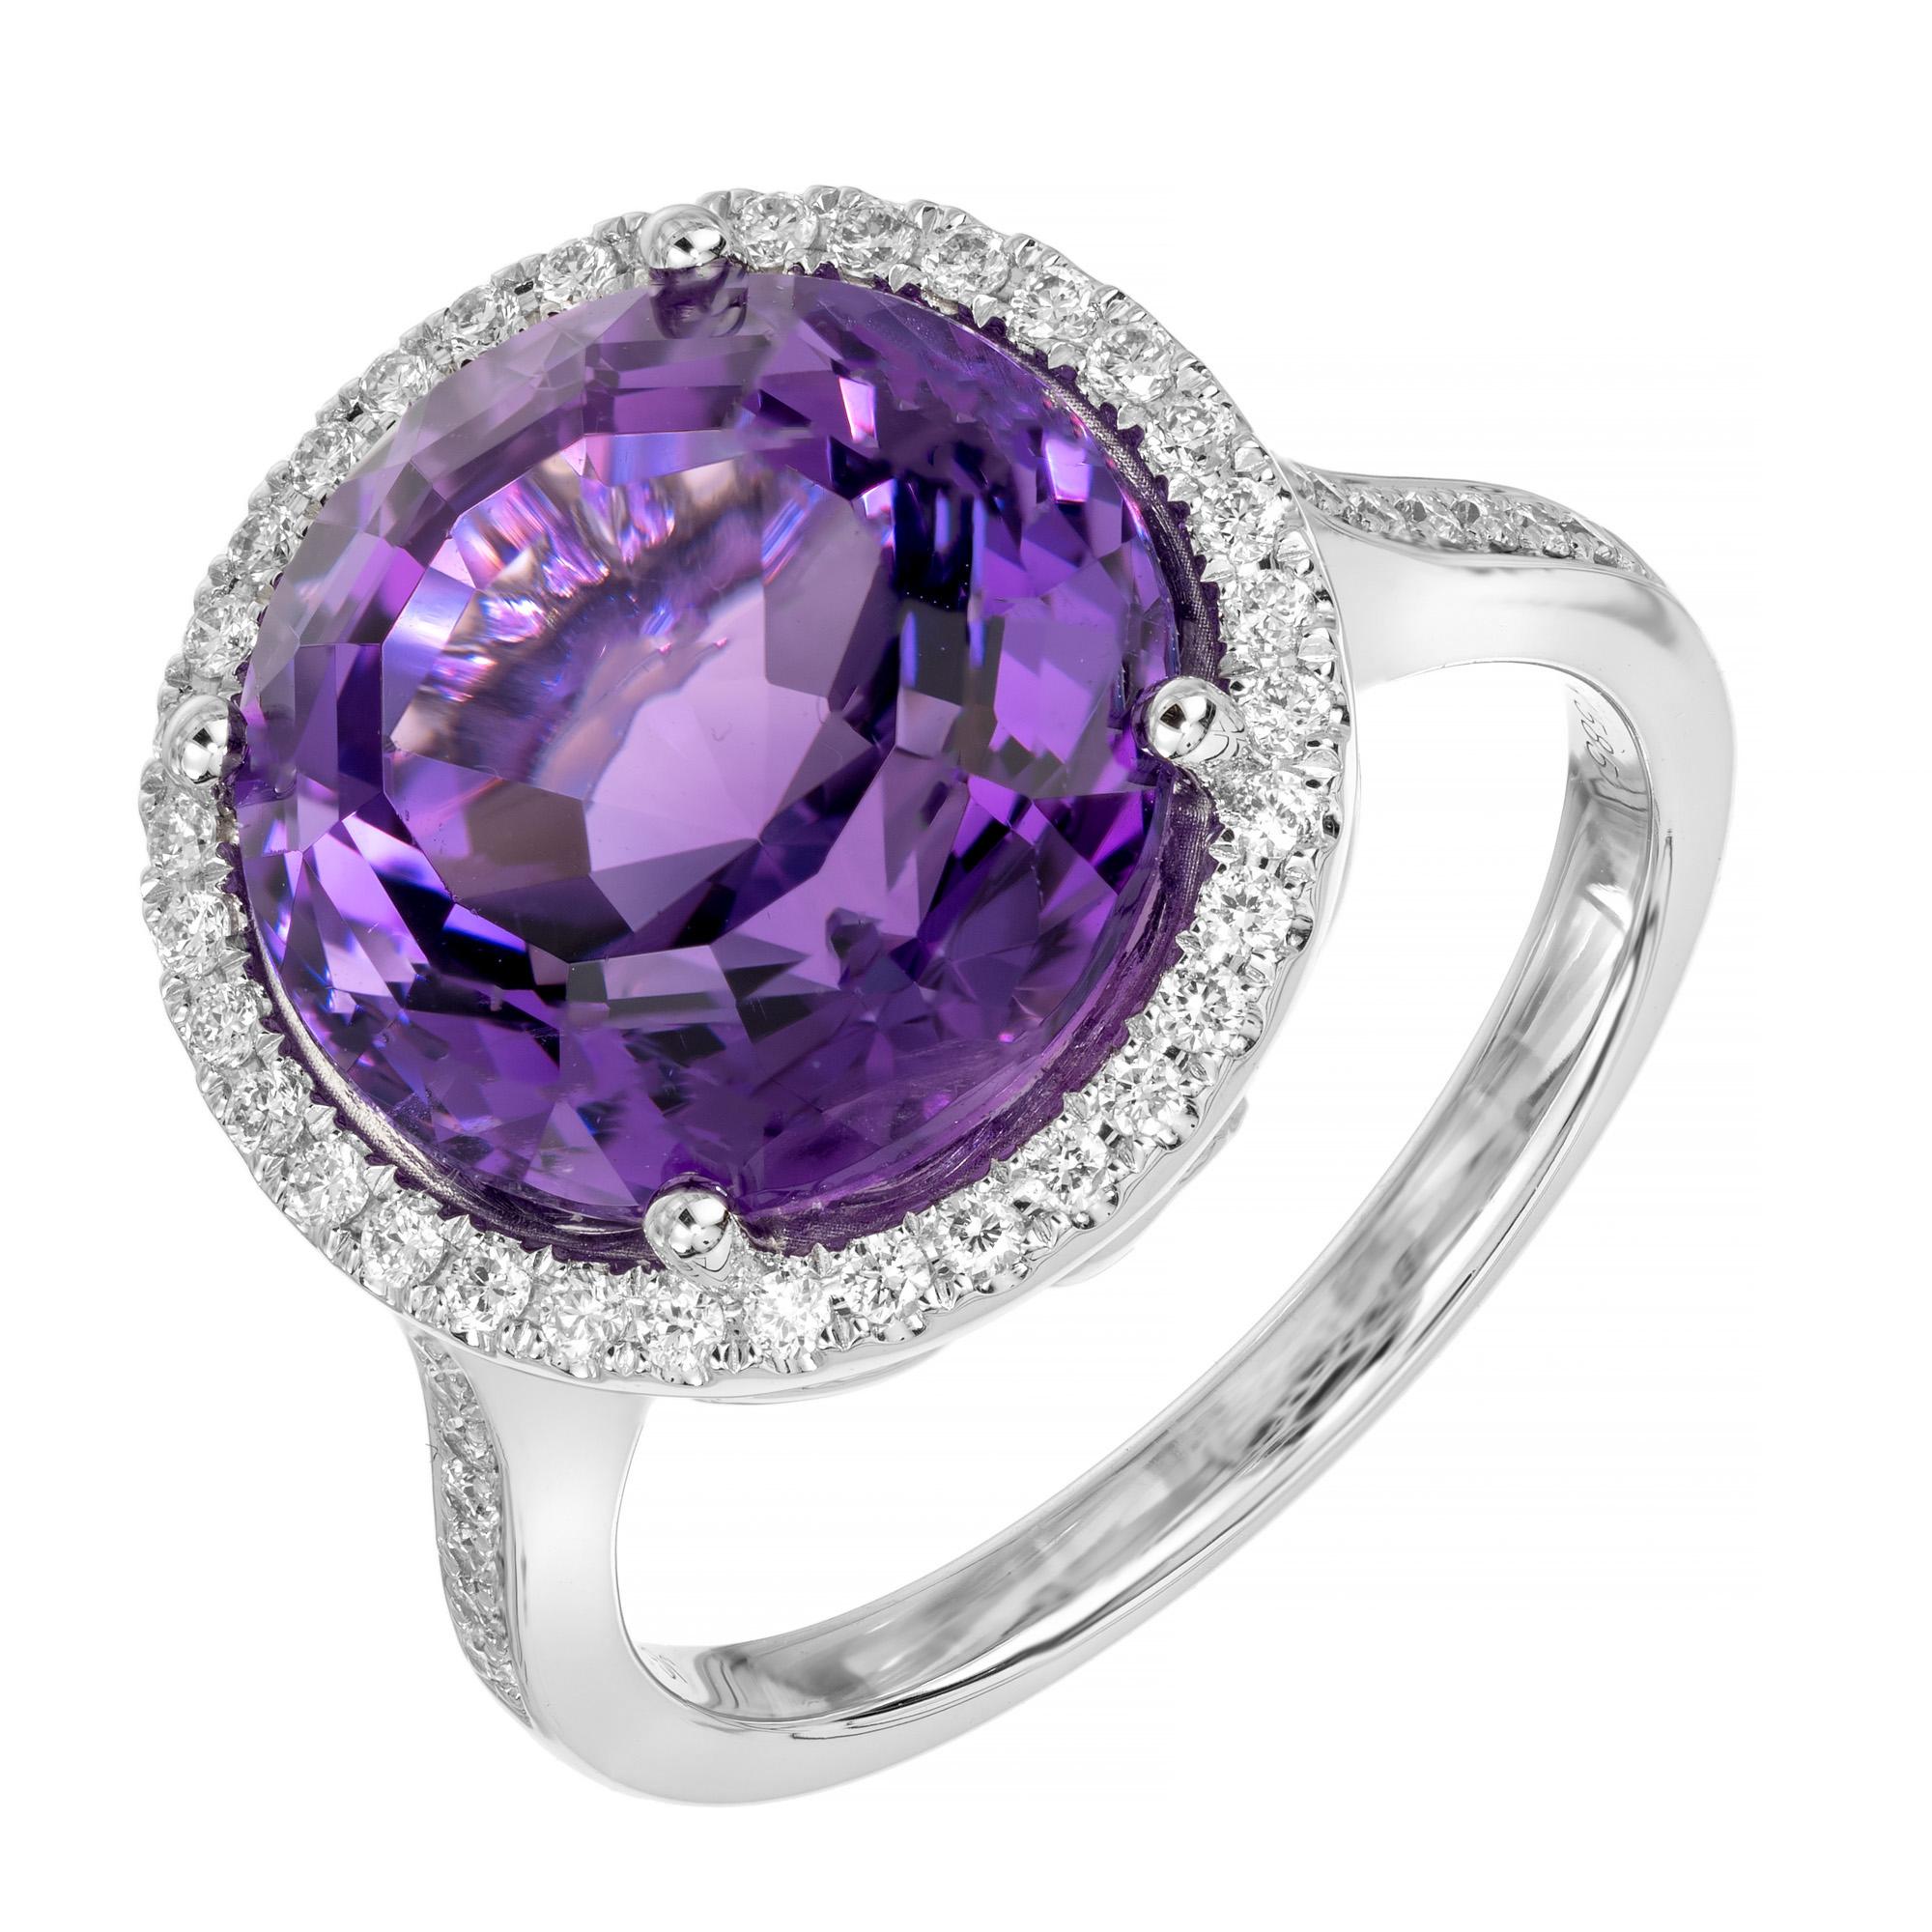 Round Cut 6.46 Carat Round Amethyst Diamond Halo White Gold Cocktail Ring  For Sale